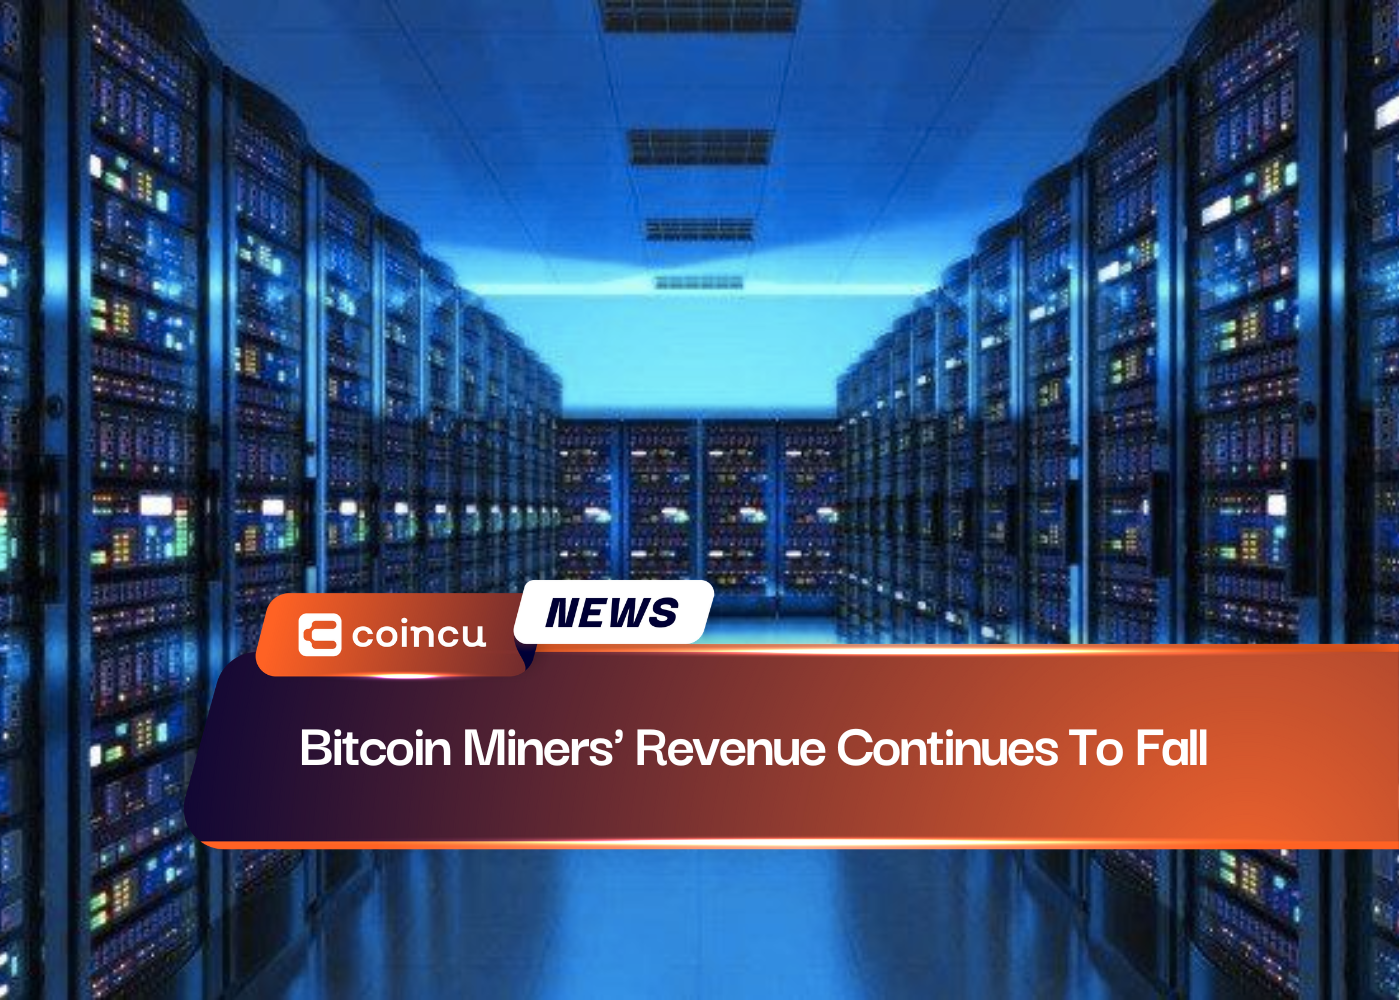 Bitcoin Miners' Revenue Continues To Fall